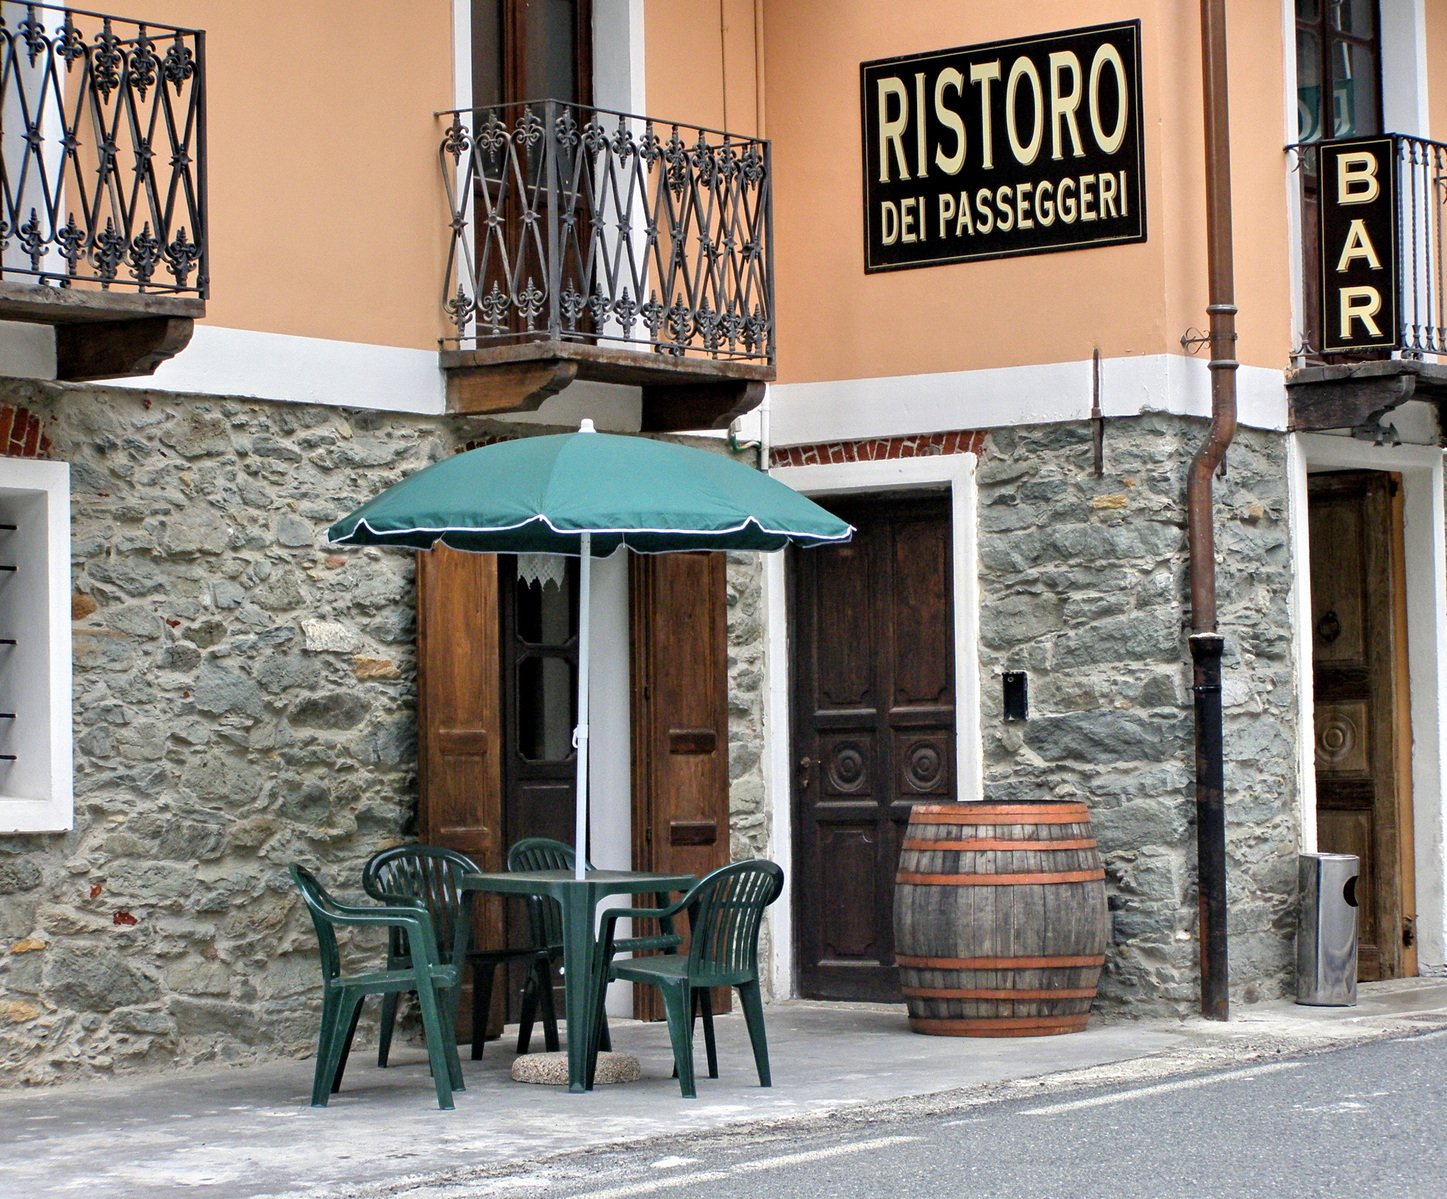 two tables with umbrellas are in front of a small cafe